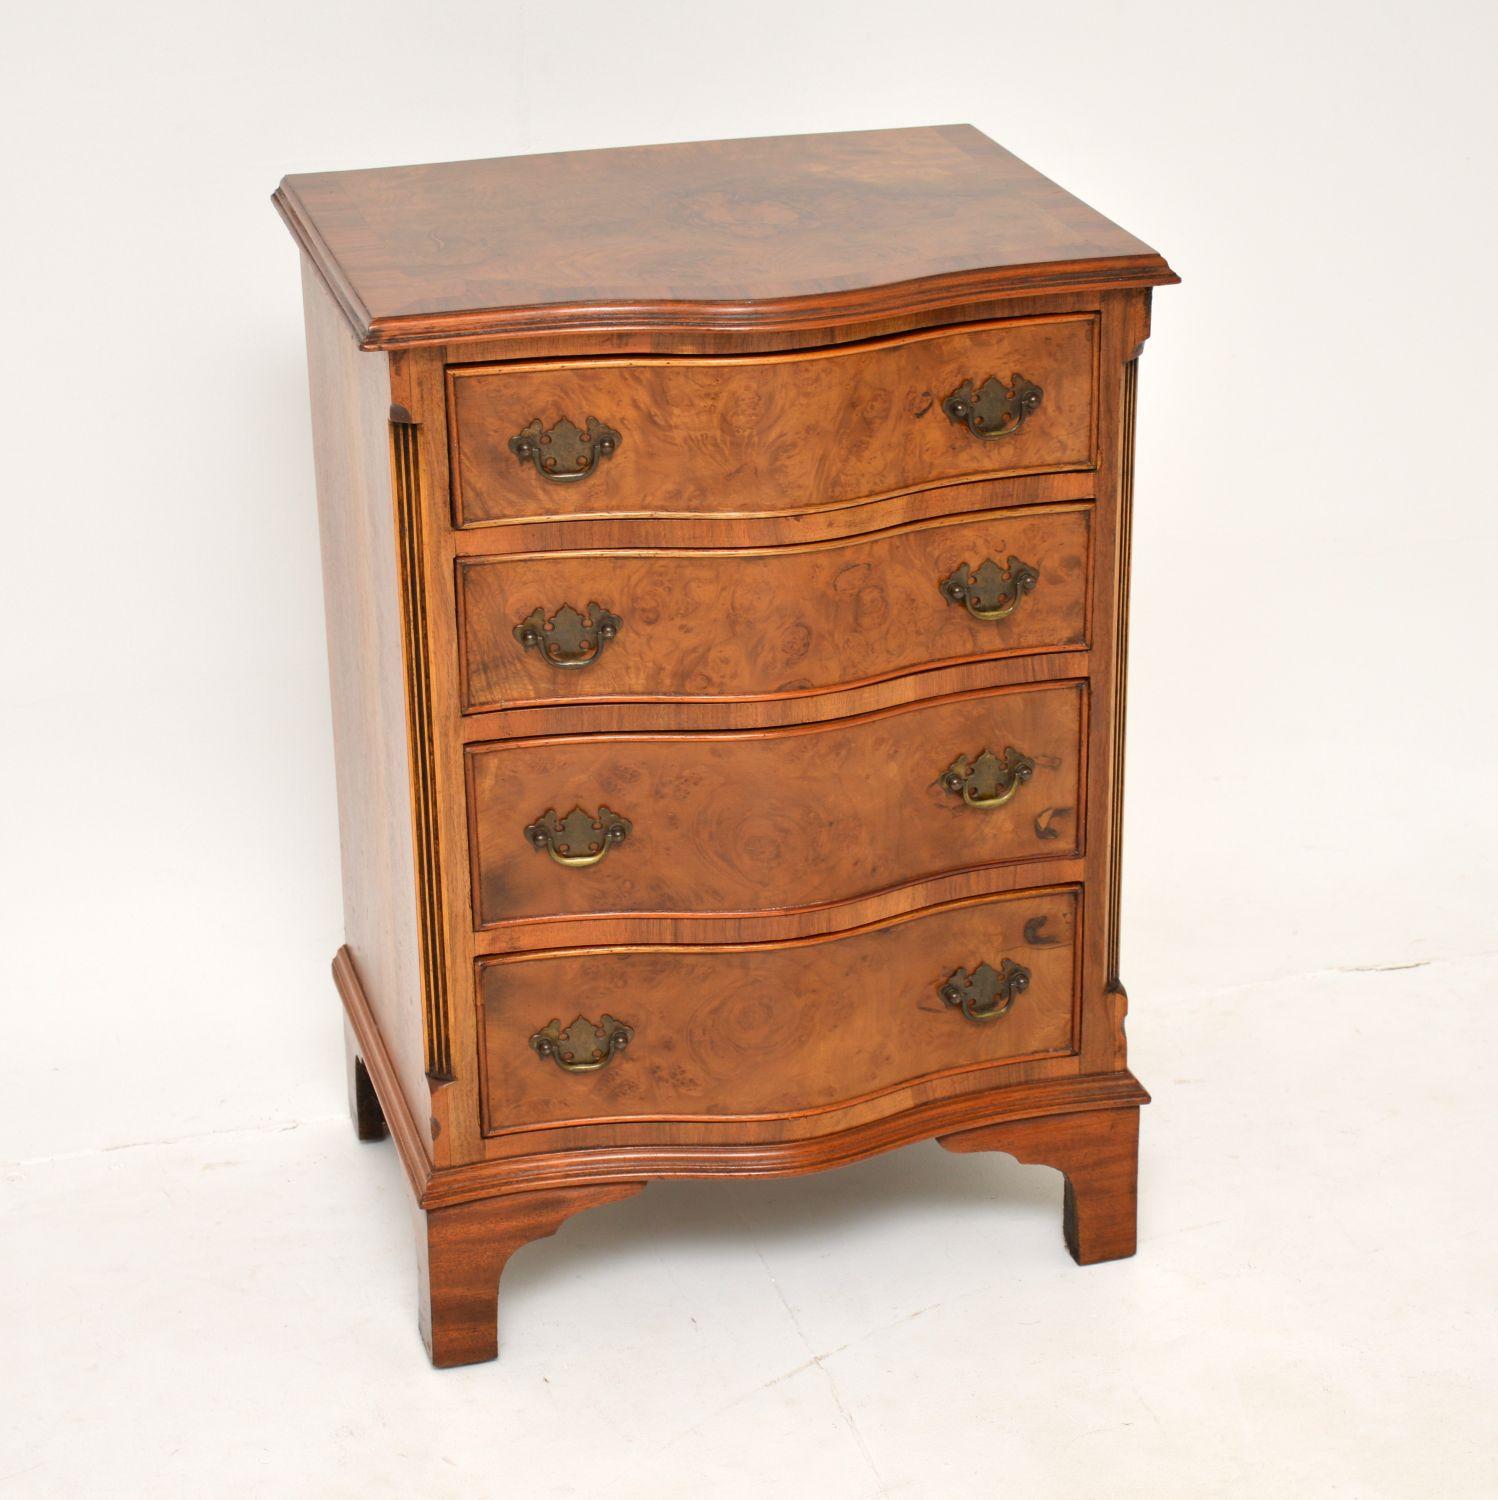 It is of excellent quality, with beautiful burr walnut grain patterns. This chest has a cross banded top, grooved canted corners, bracket feet and the drawers are graduated in depth, with original brass handles. It is a very useful size to be used